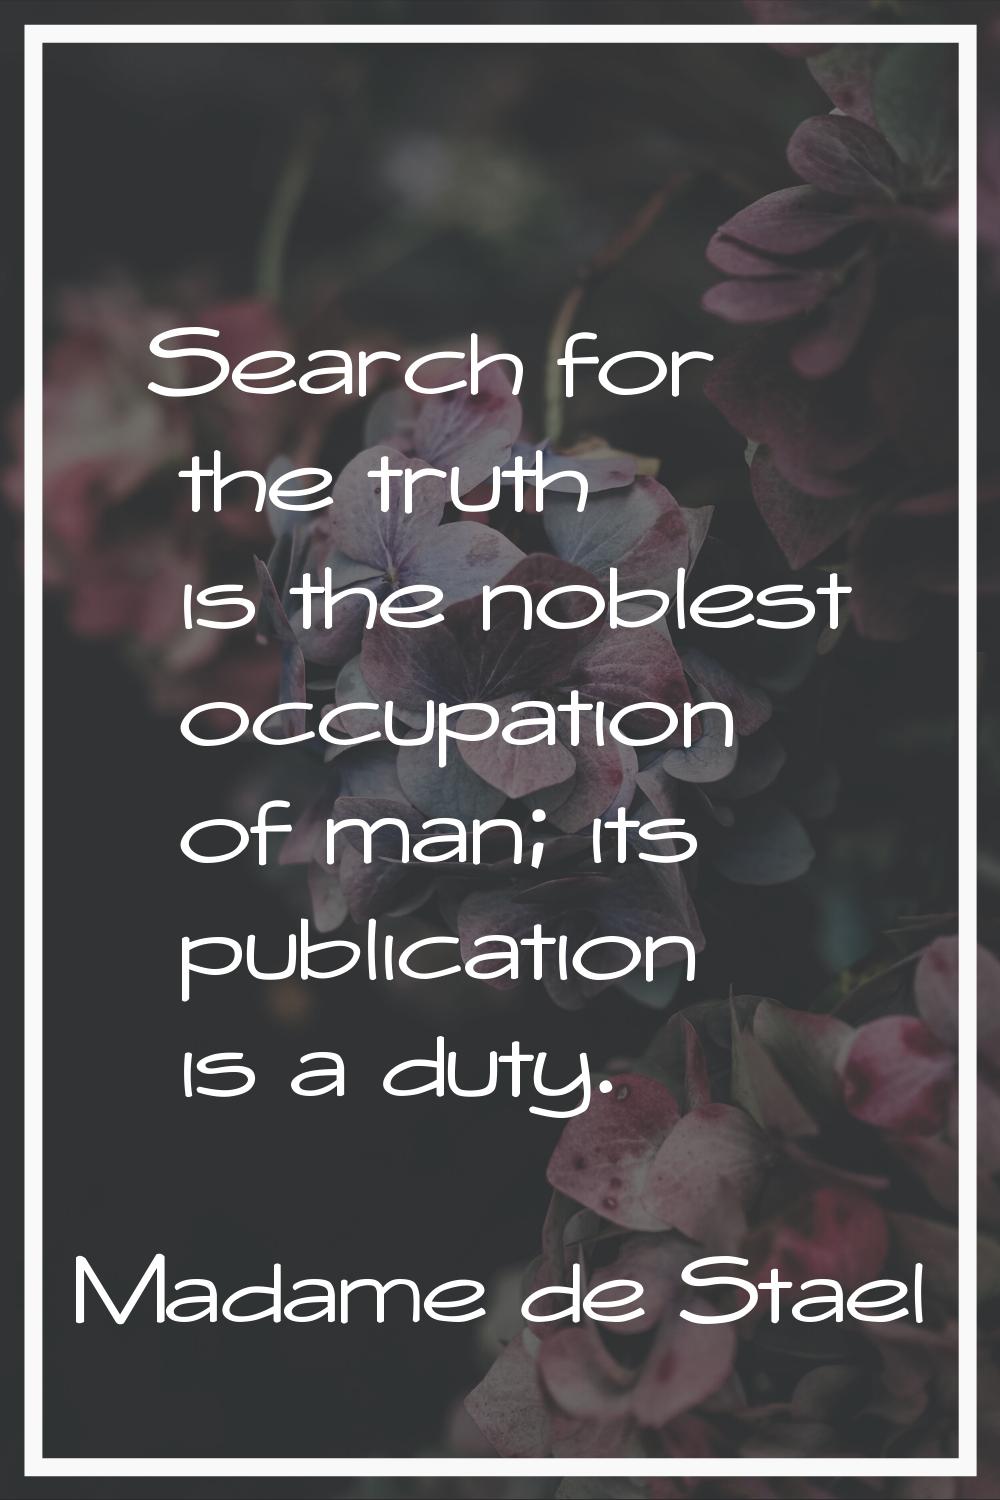 Search for the truth is the noblest occupation of man; its publication is a duty.